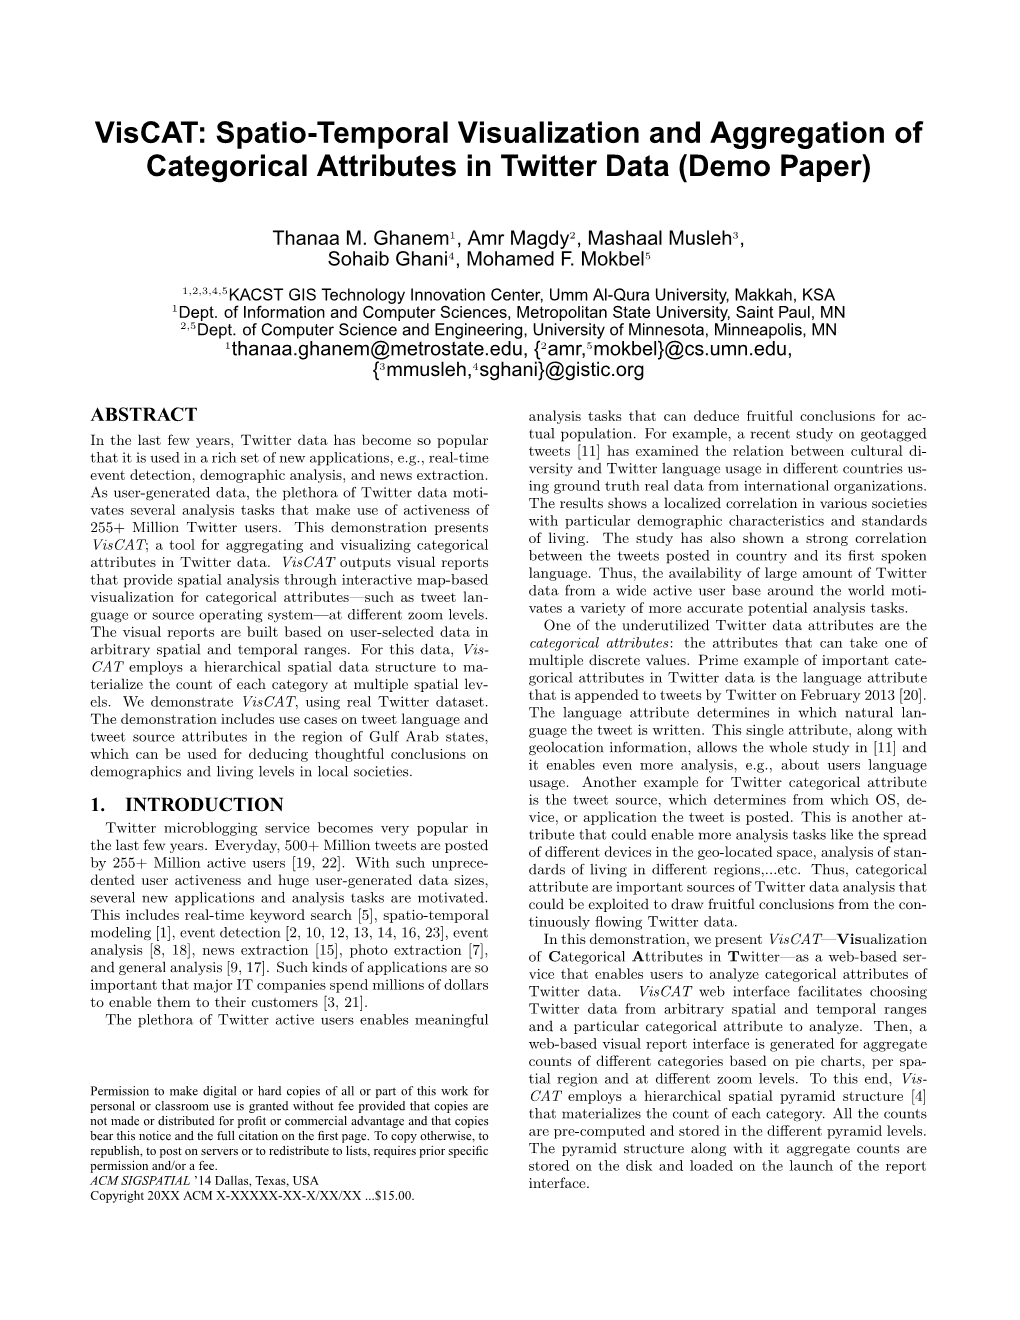 Viscat: Spatio-Temporal Visualization and Aggregation of Categorical Attributes in Twitter Data (Demo Paper)